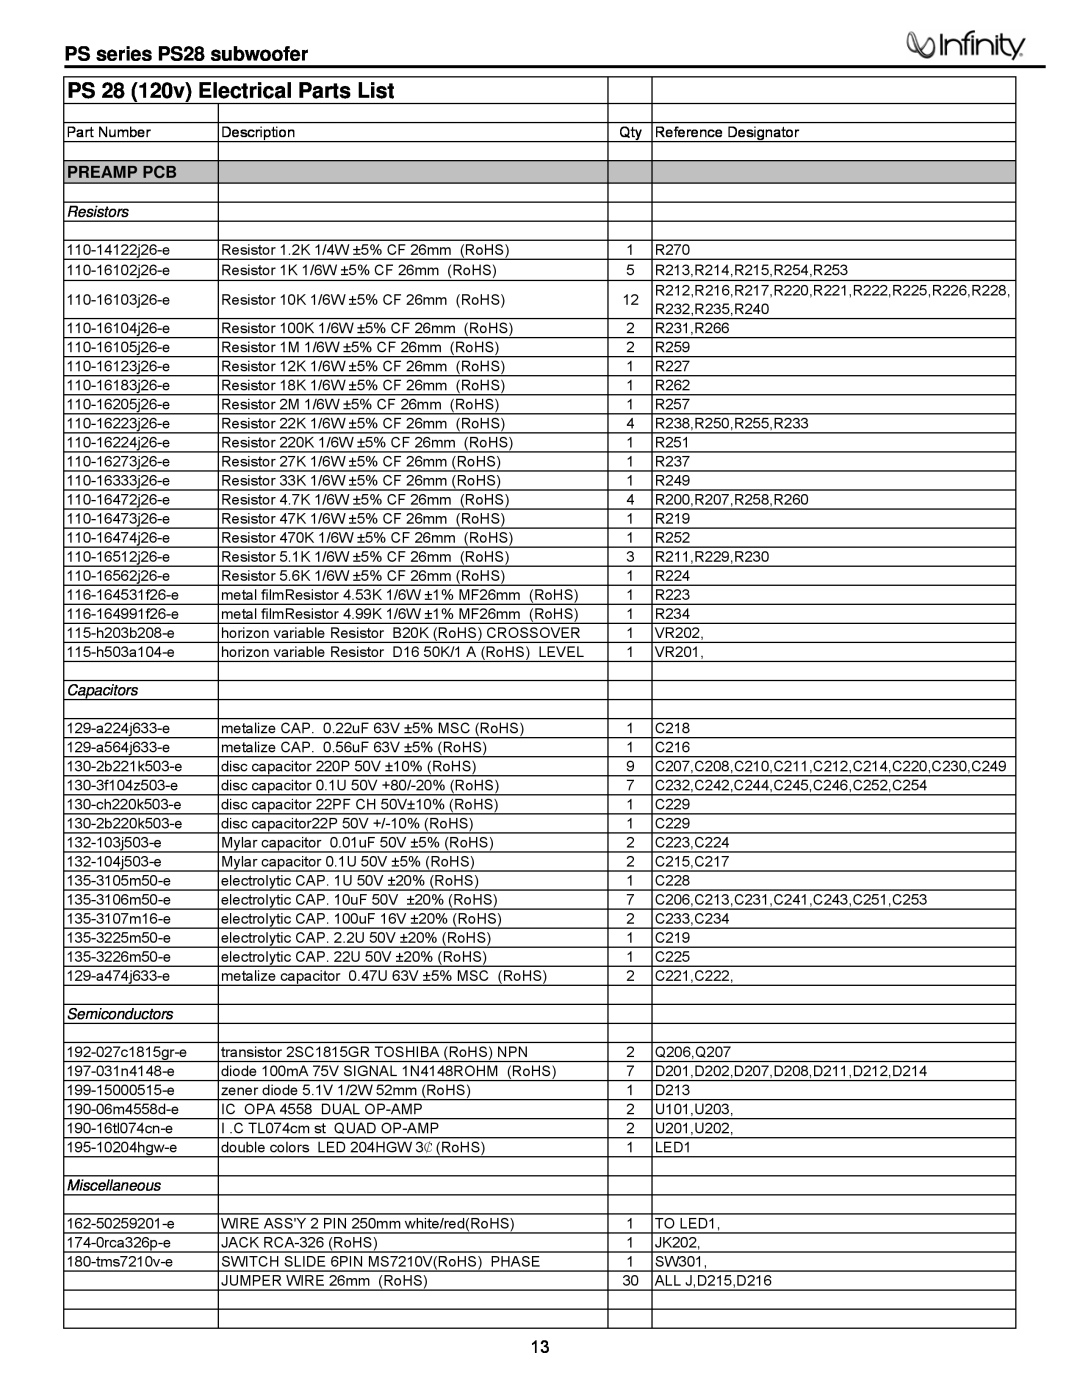 Infinity service manual PS 28 120v Electrical Parts List, PS series PS28 subwoofer, Preamp Pcb 